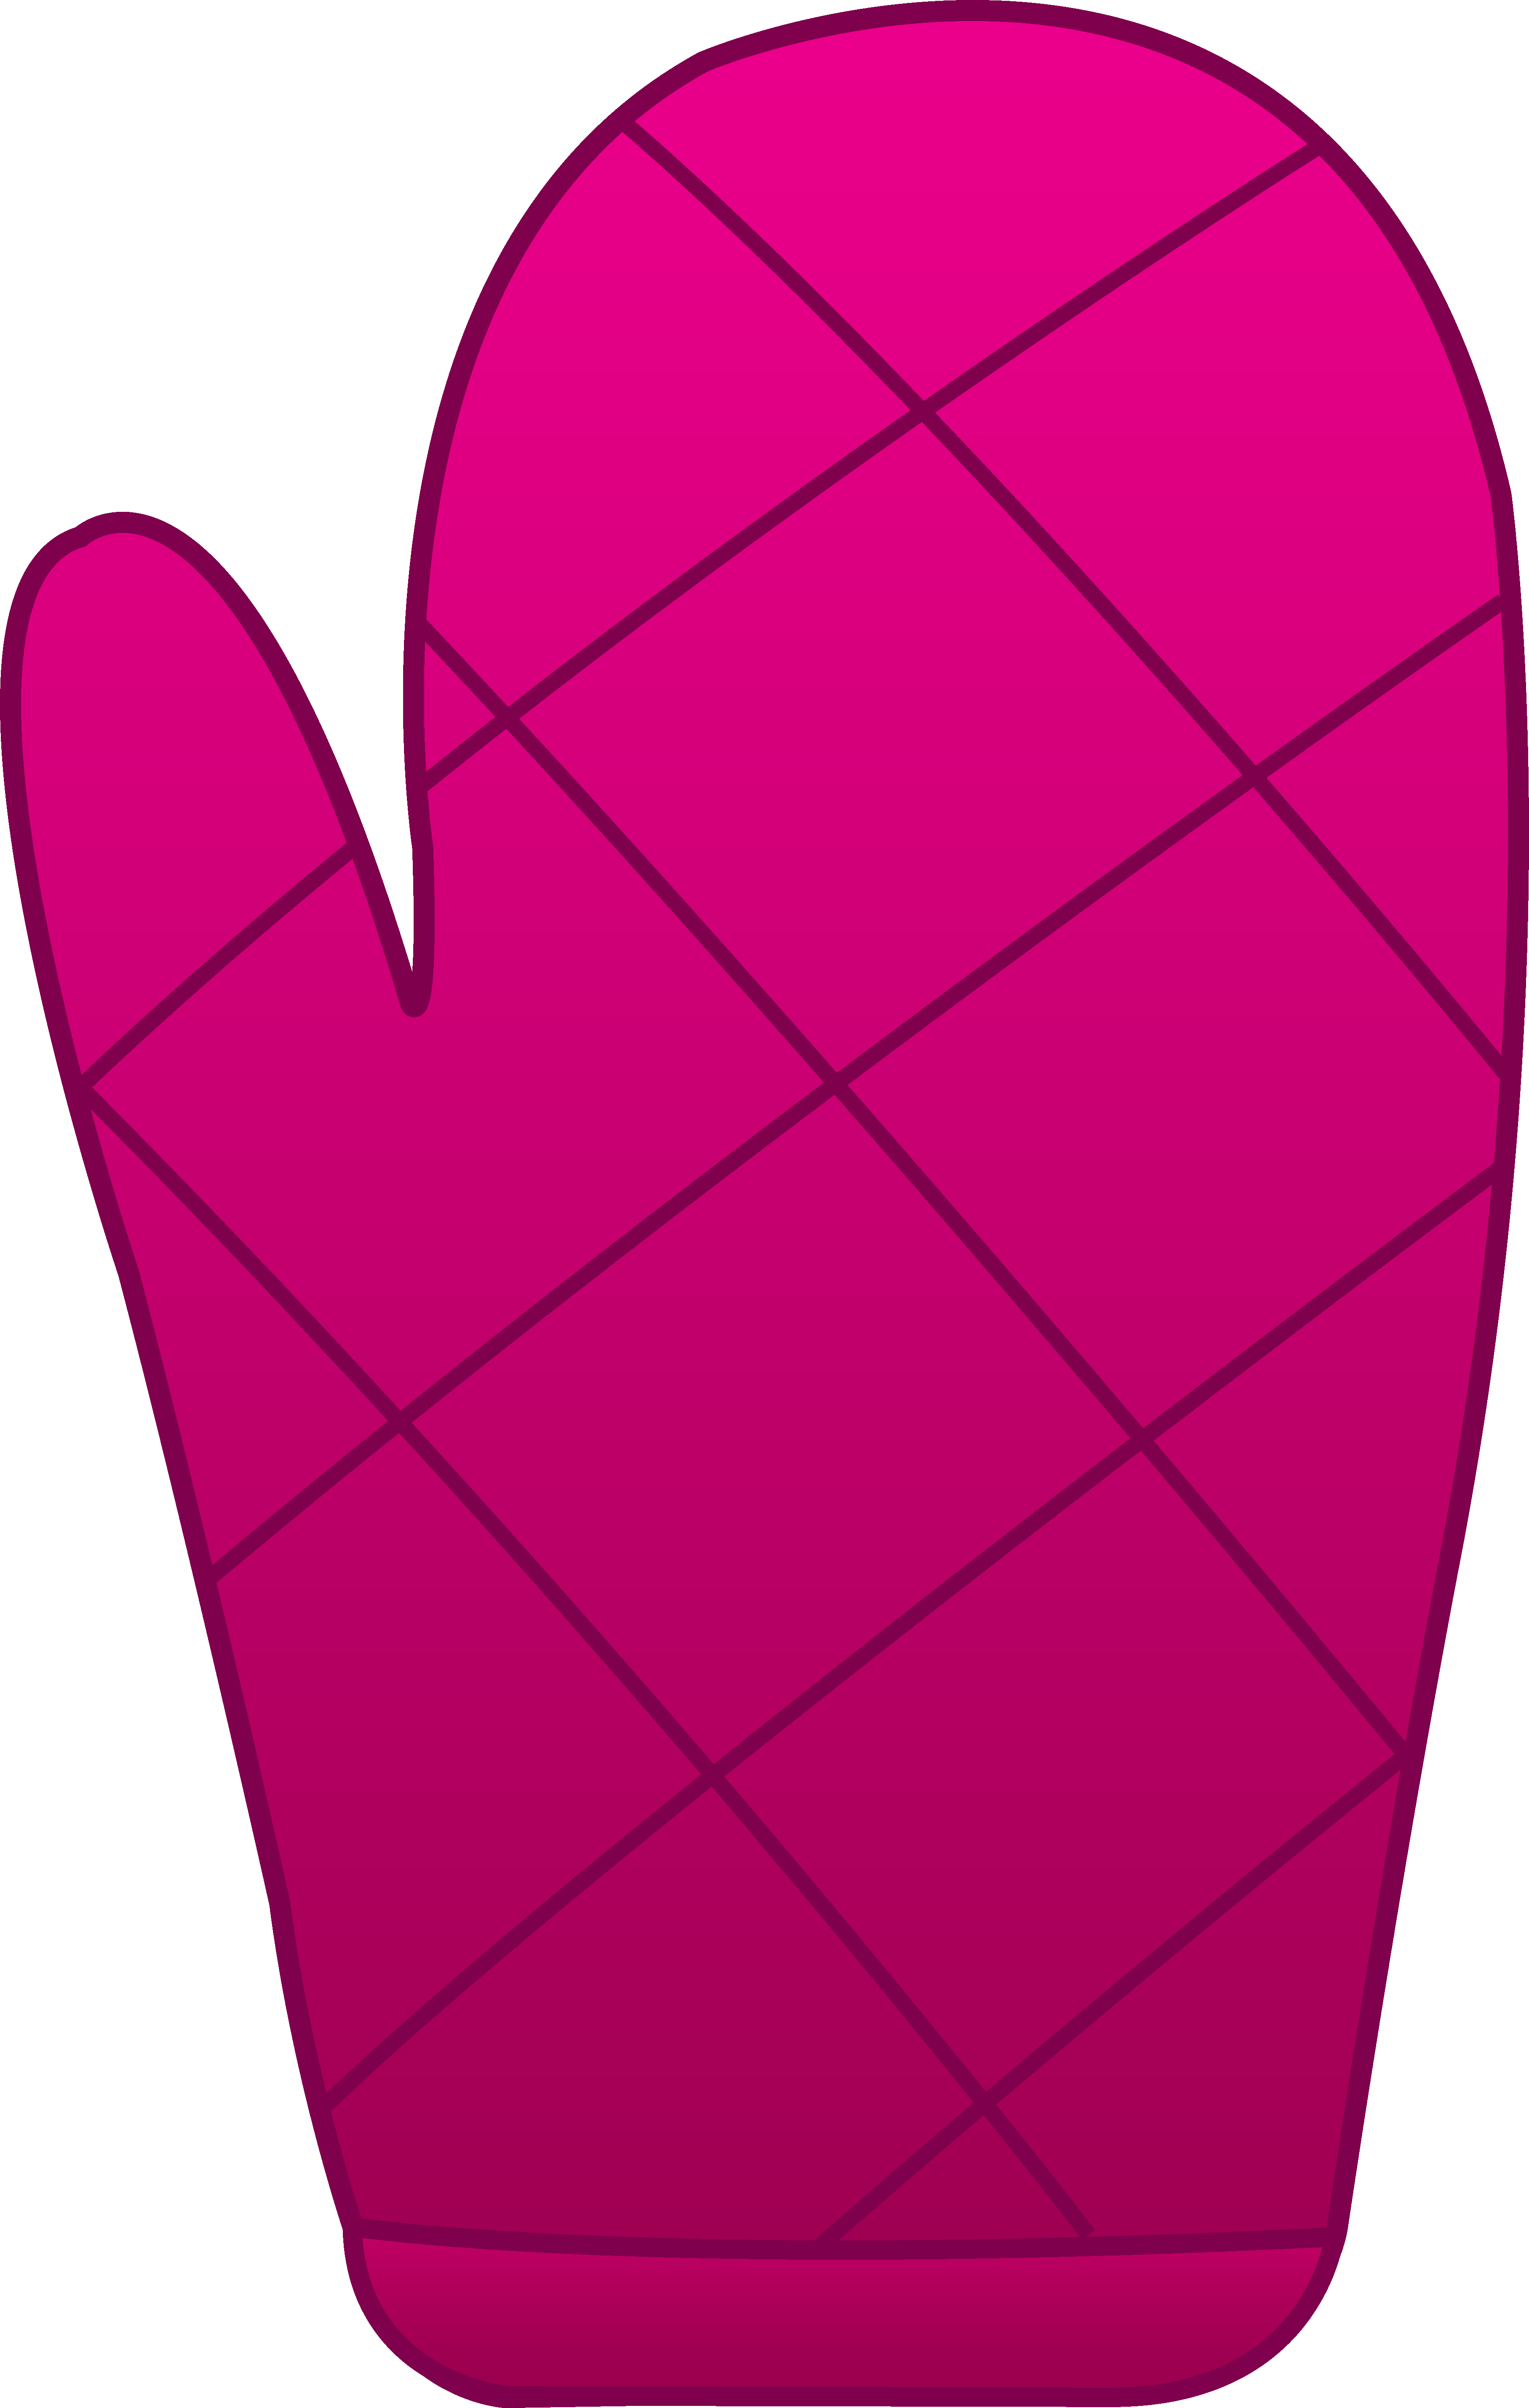 clipart of gloves - photo #21